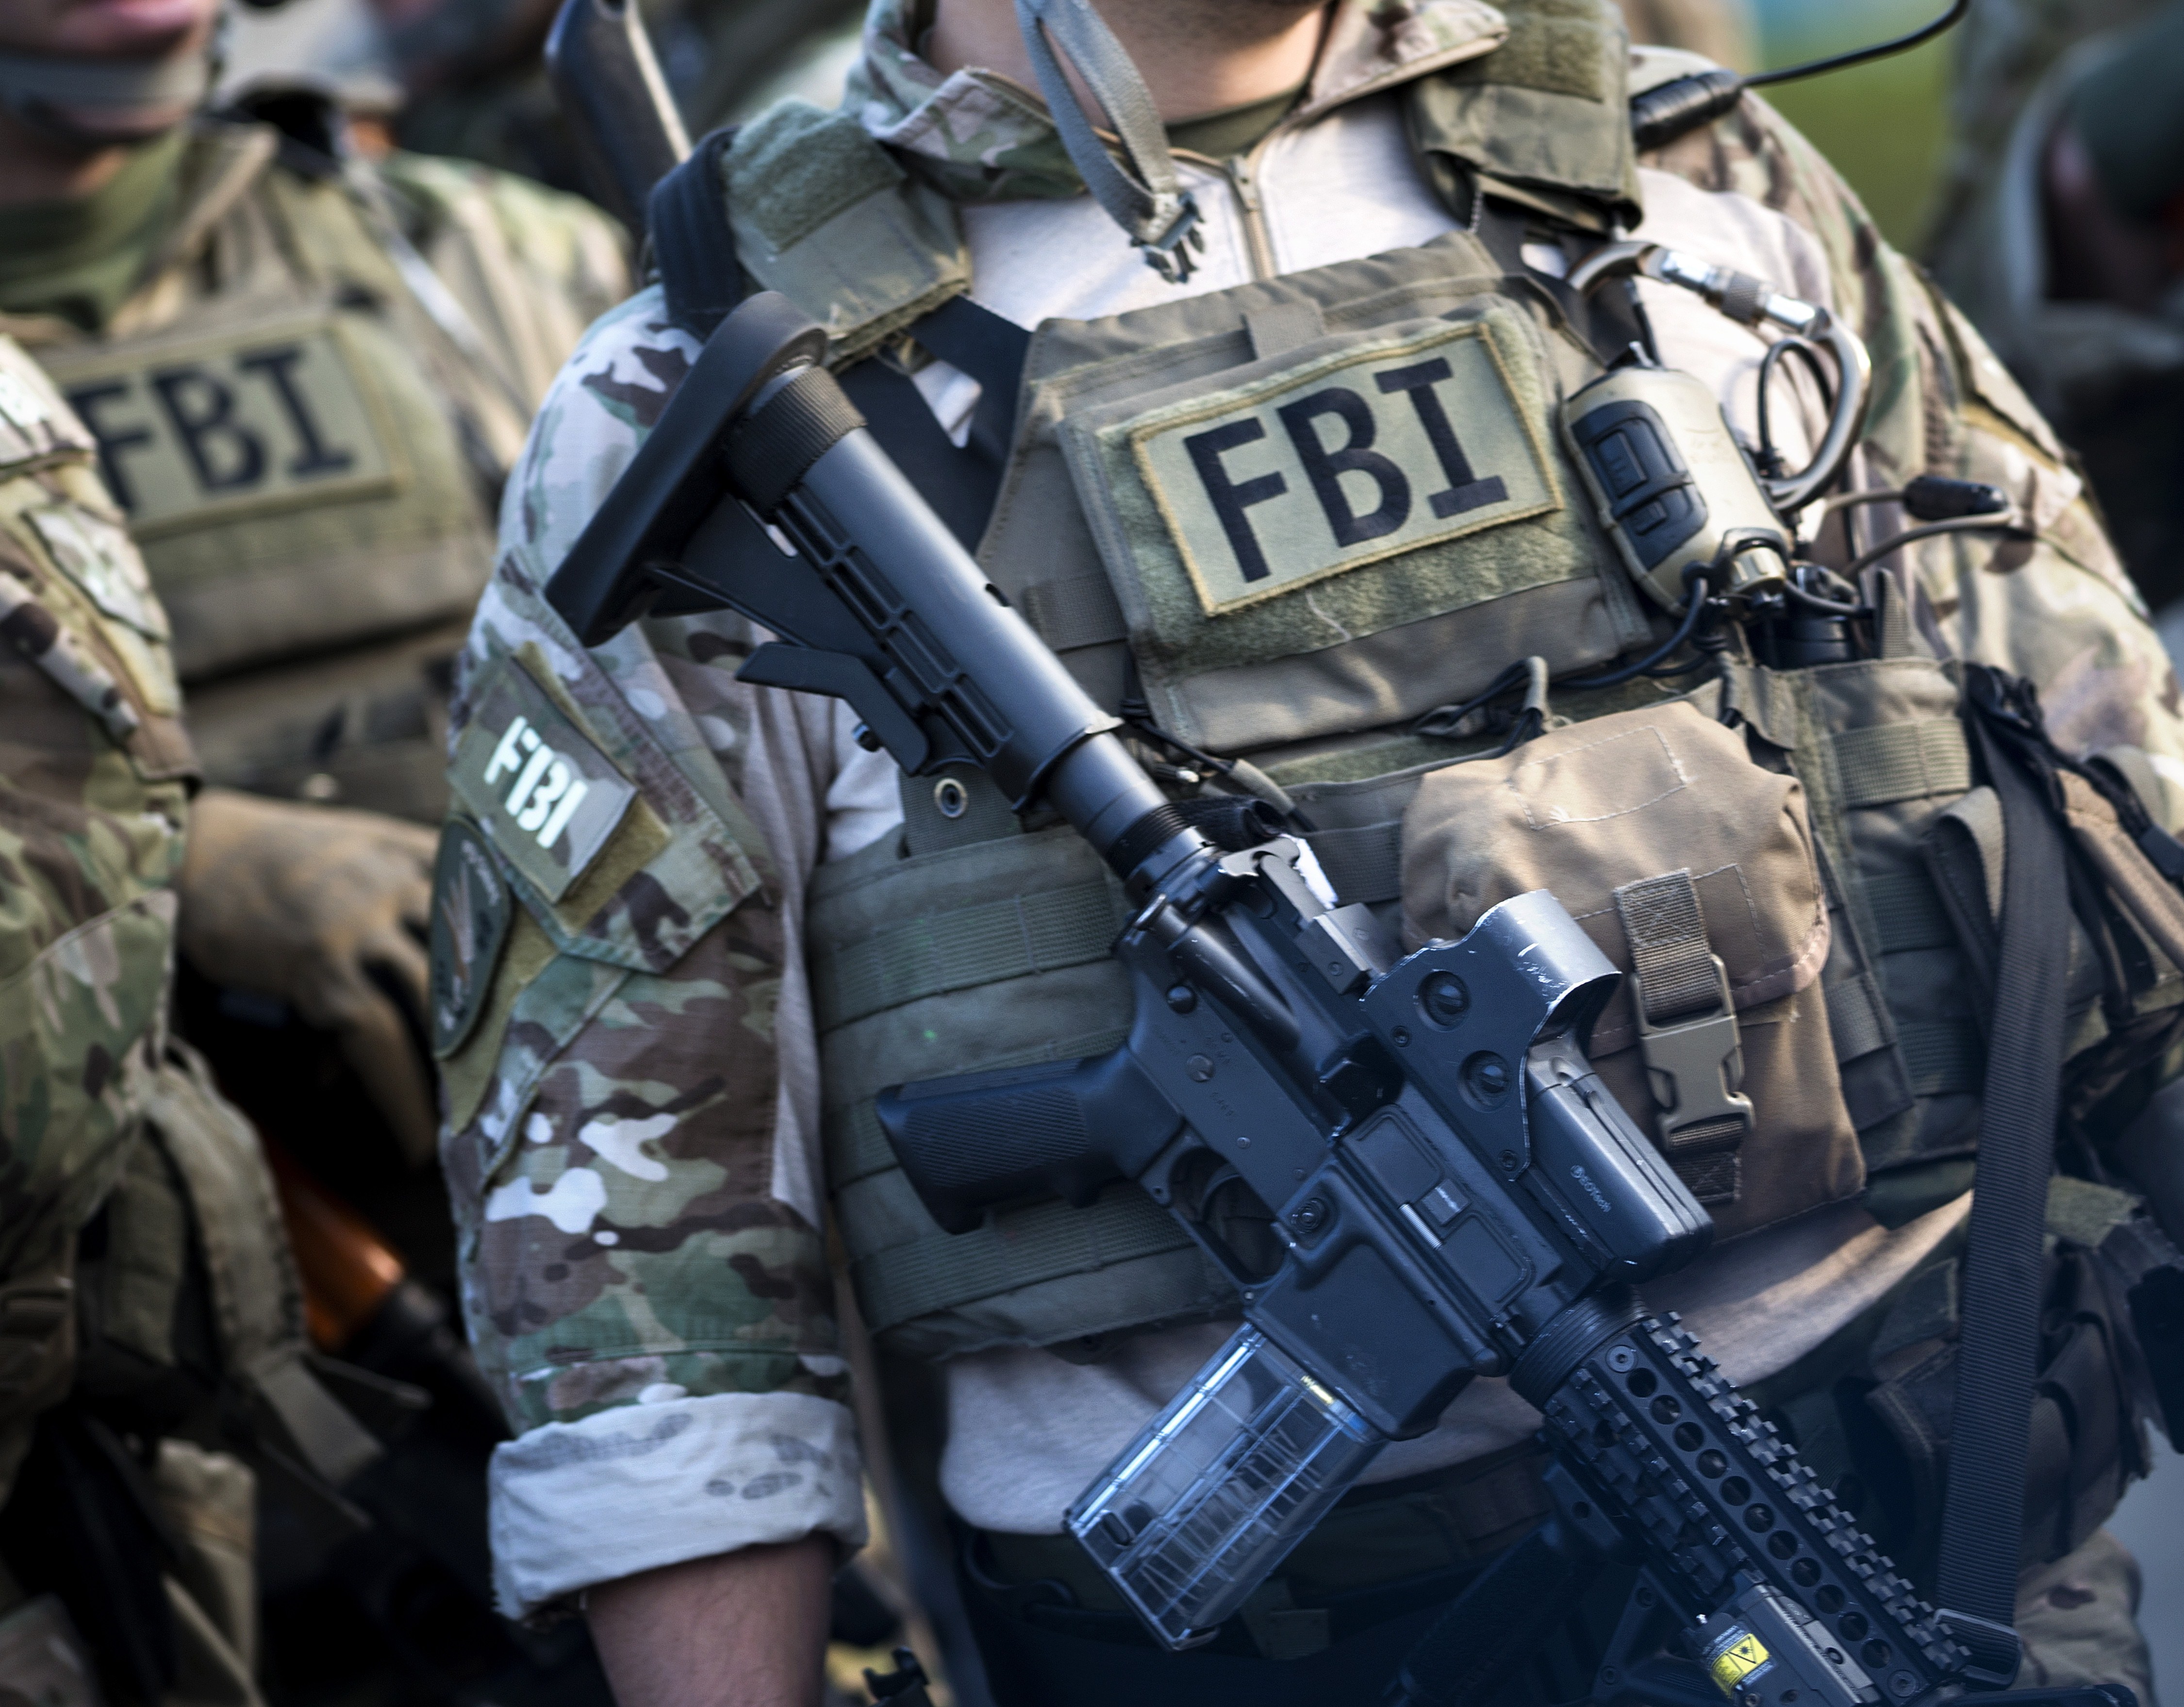 Members of an FBI SWAT team are seen during a training exercise in Alexandria, Va., on May 2, 2014 (Brendan Smialowski—AFP/Getty Images)